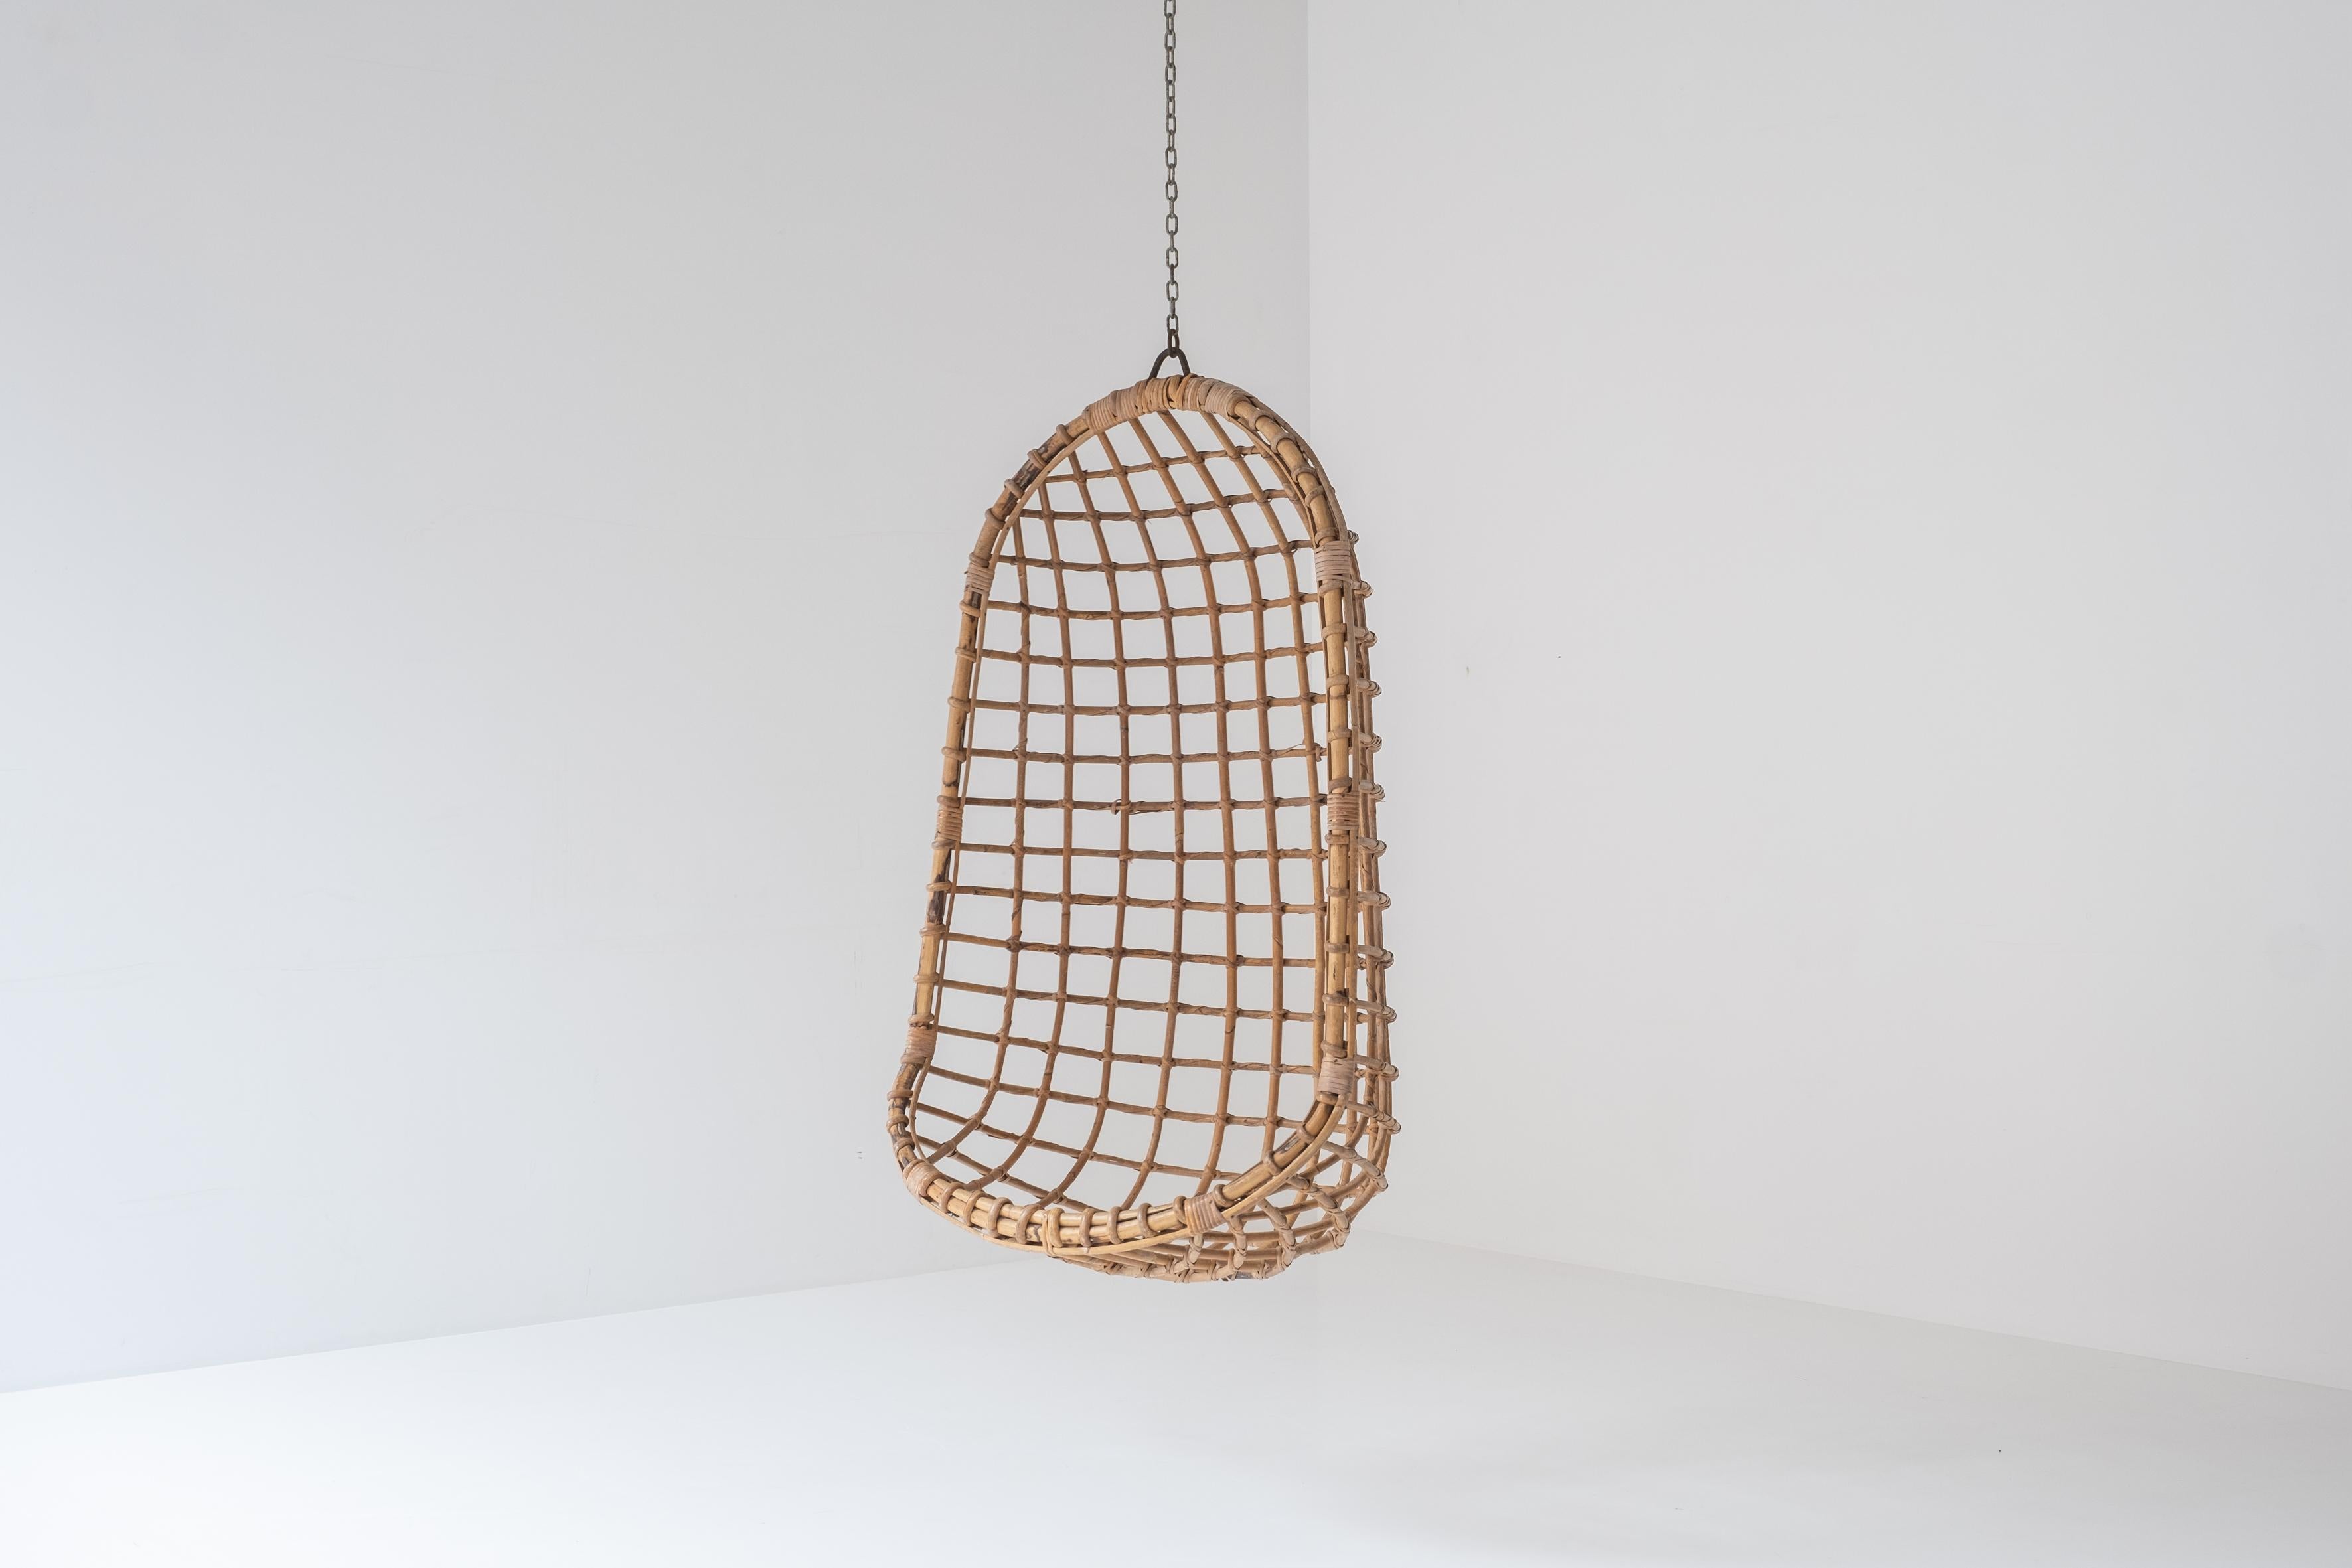 Ceiling mounted Egg chair by Rohé Noordwolde, The Netherlands 1960’s. This lounge chair is made out of bent bamboo and cane. It is presented in its original condition and remains the original iron cage hanging suspension.